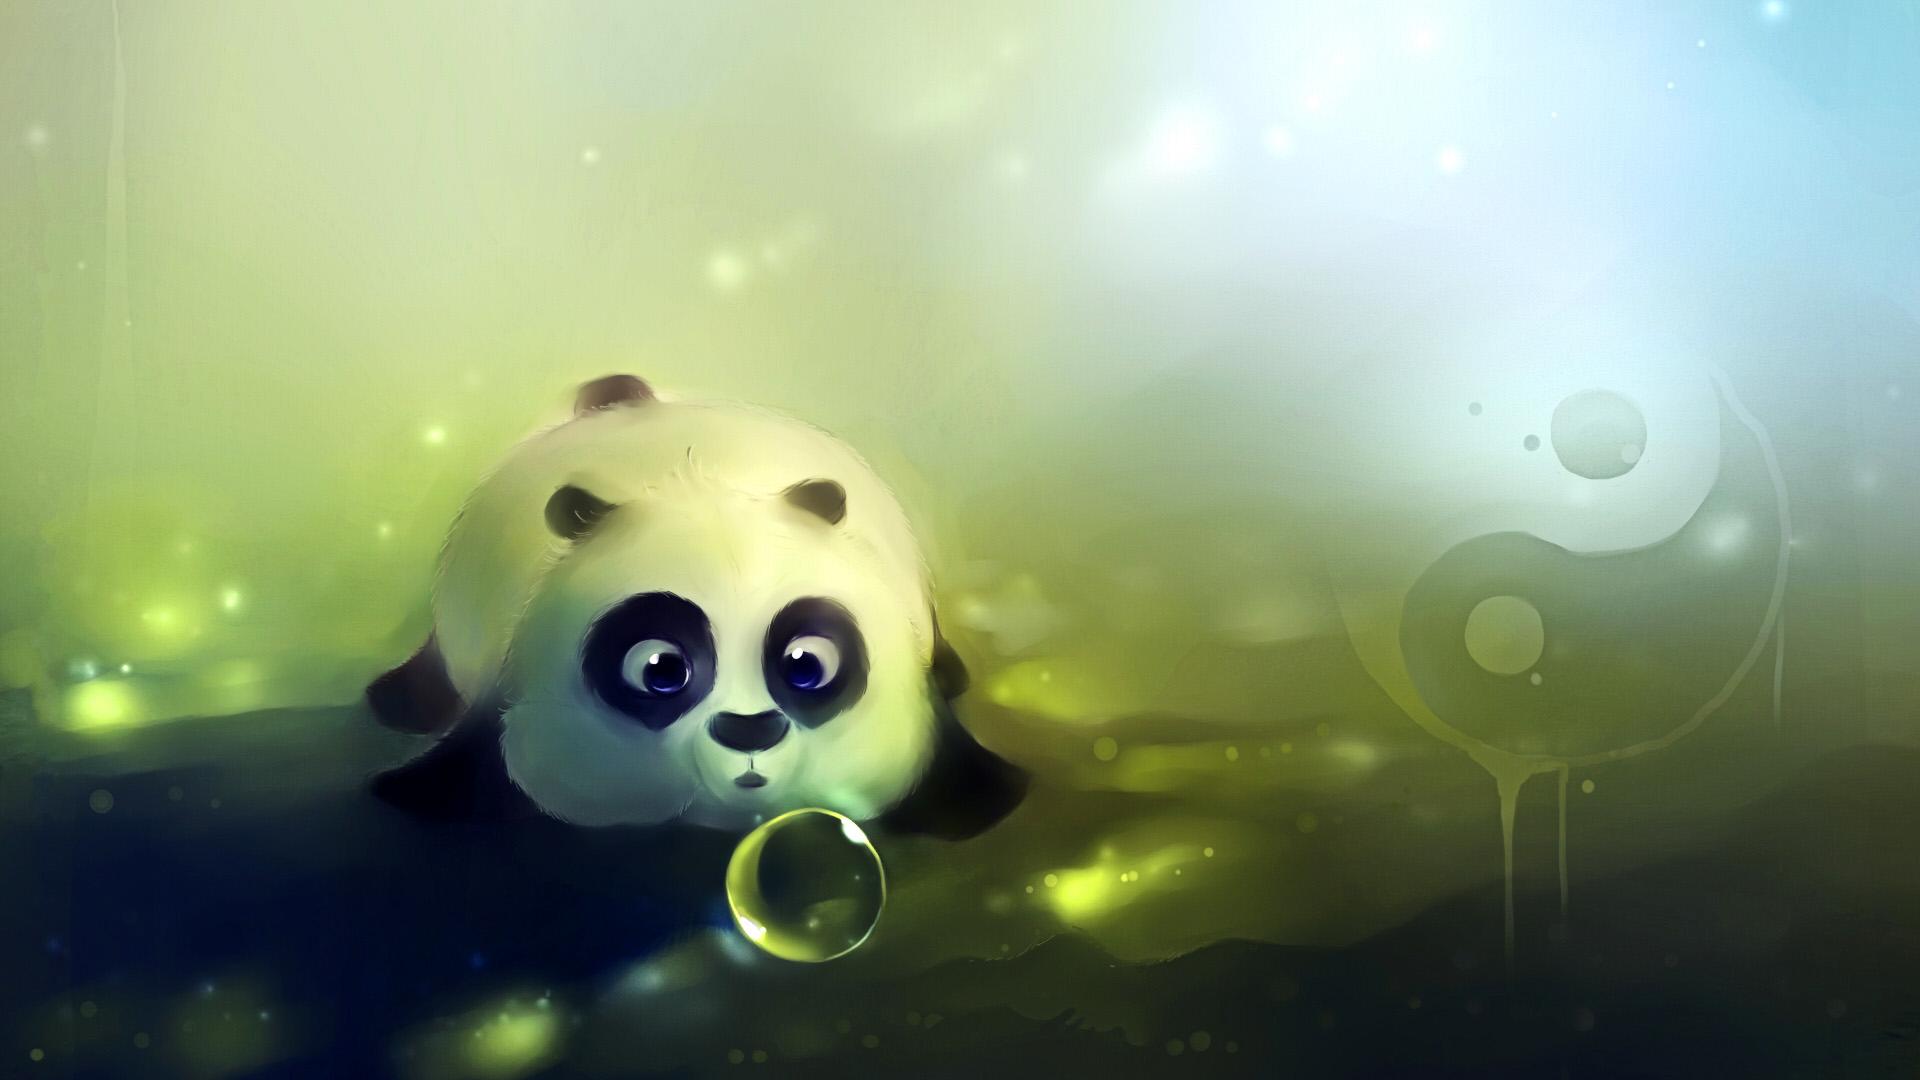 cute animated backgrounds that move